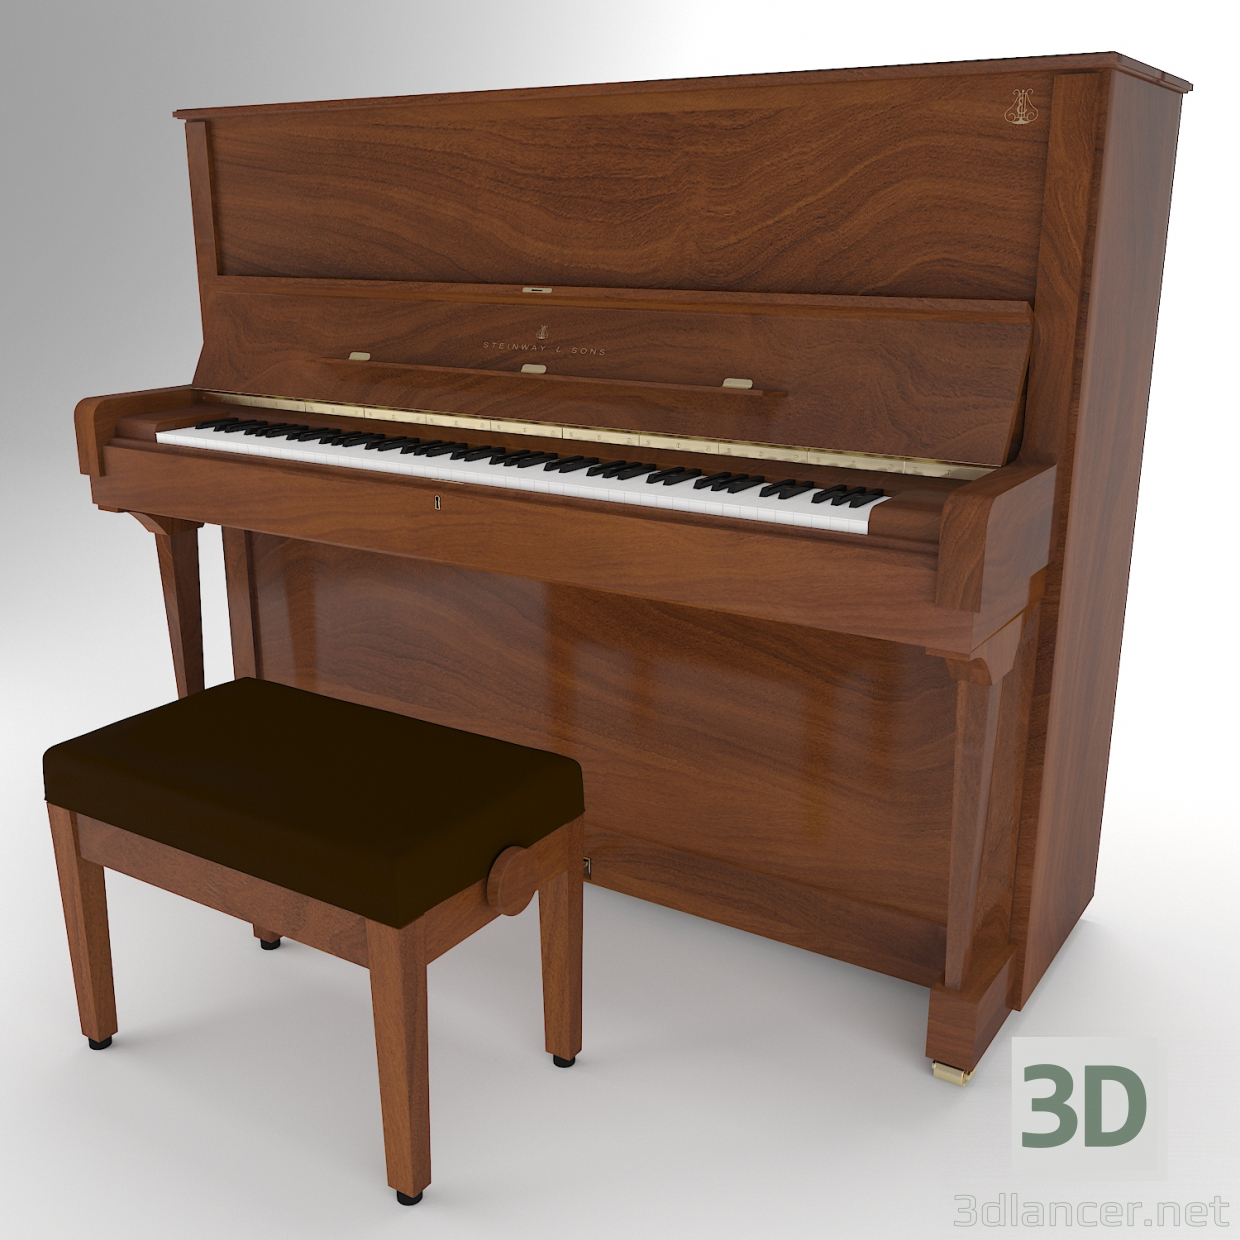 Piano Steinway And Sons V-125 3D-Modell 3D-Modell kaufen - Rendern